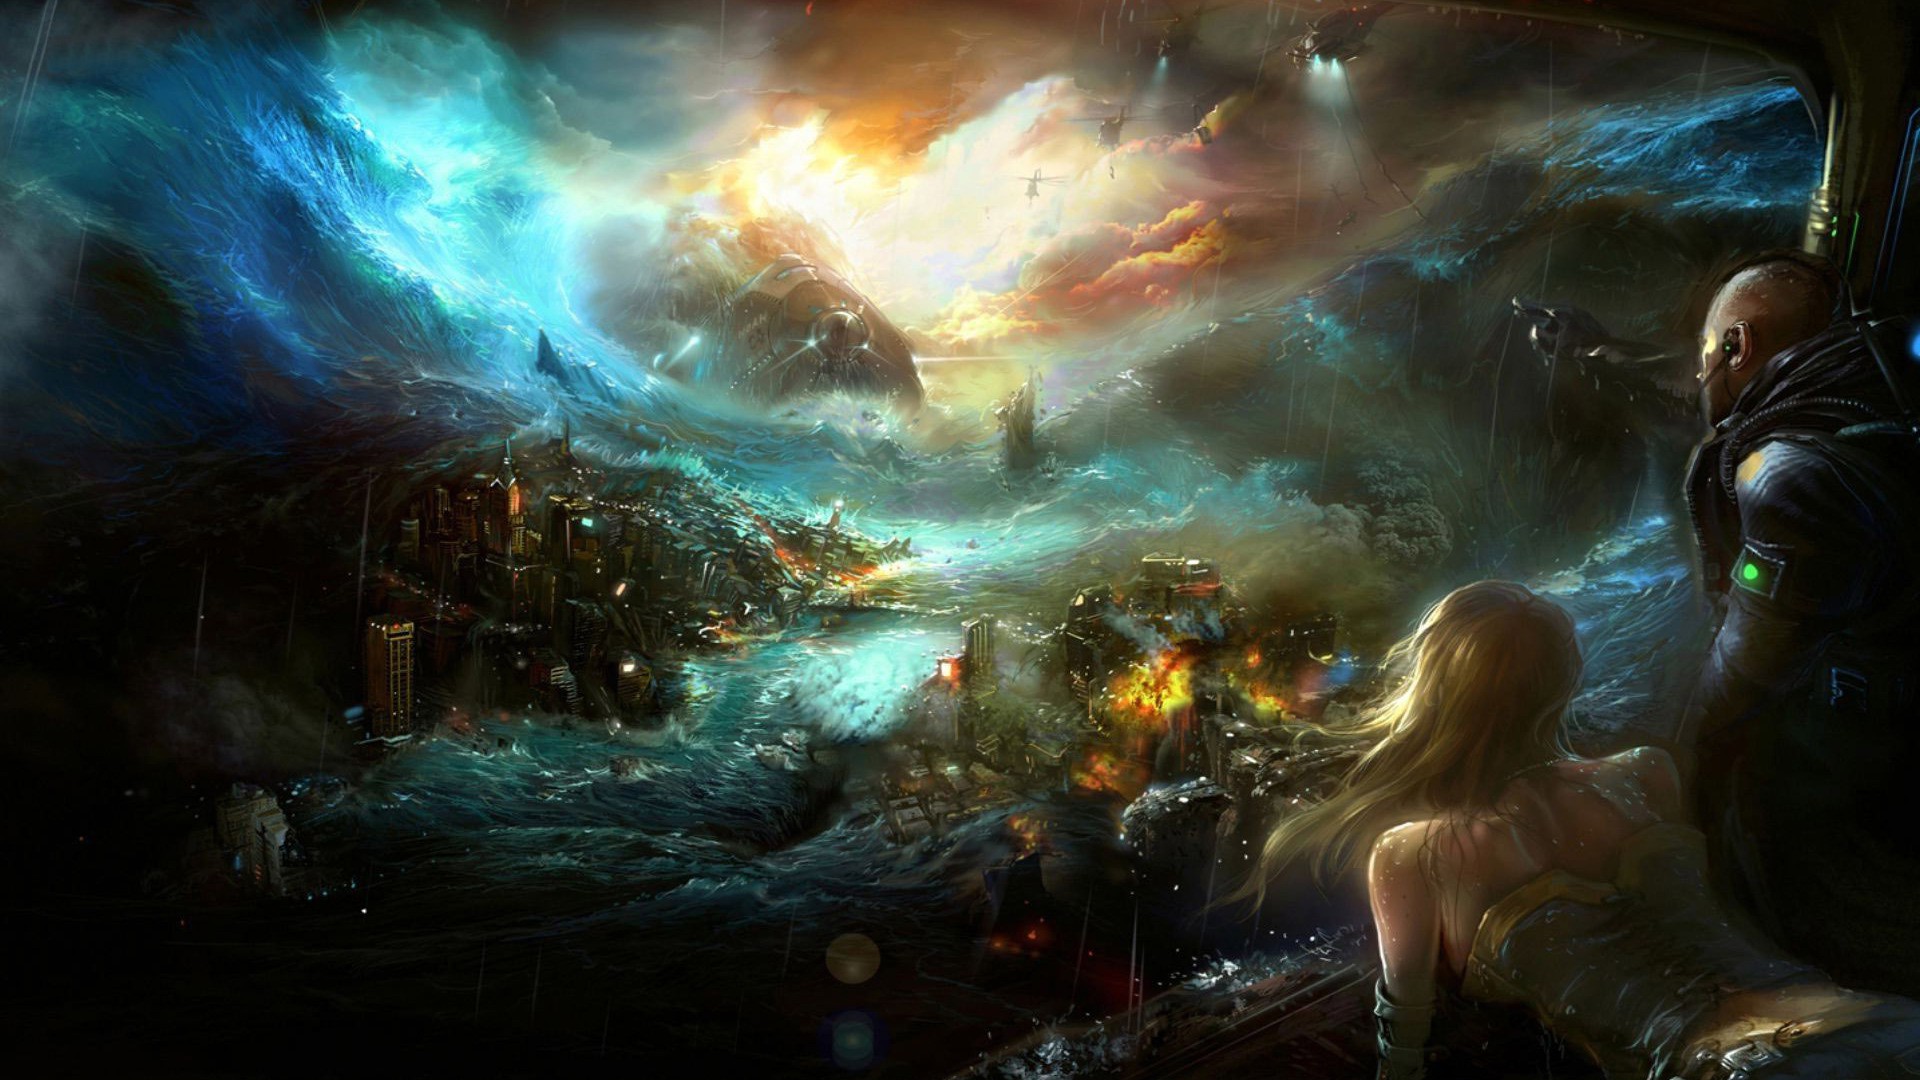 fantasy art wallpaper,action adventure game,cg artwork,strategy video game,adventure game,pc game